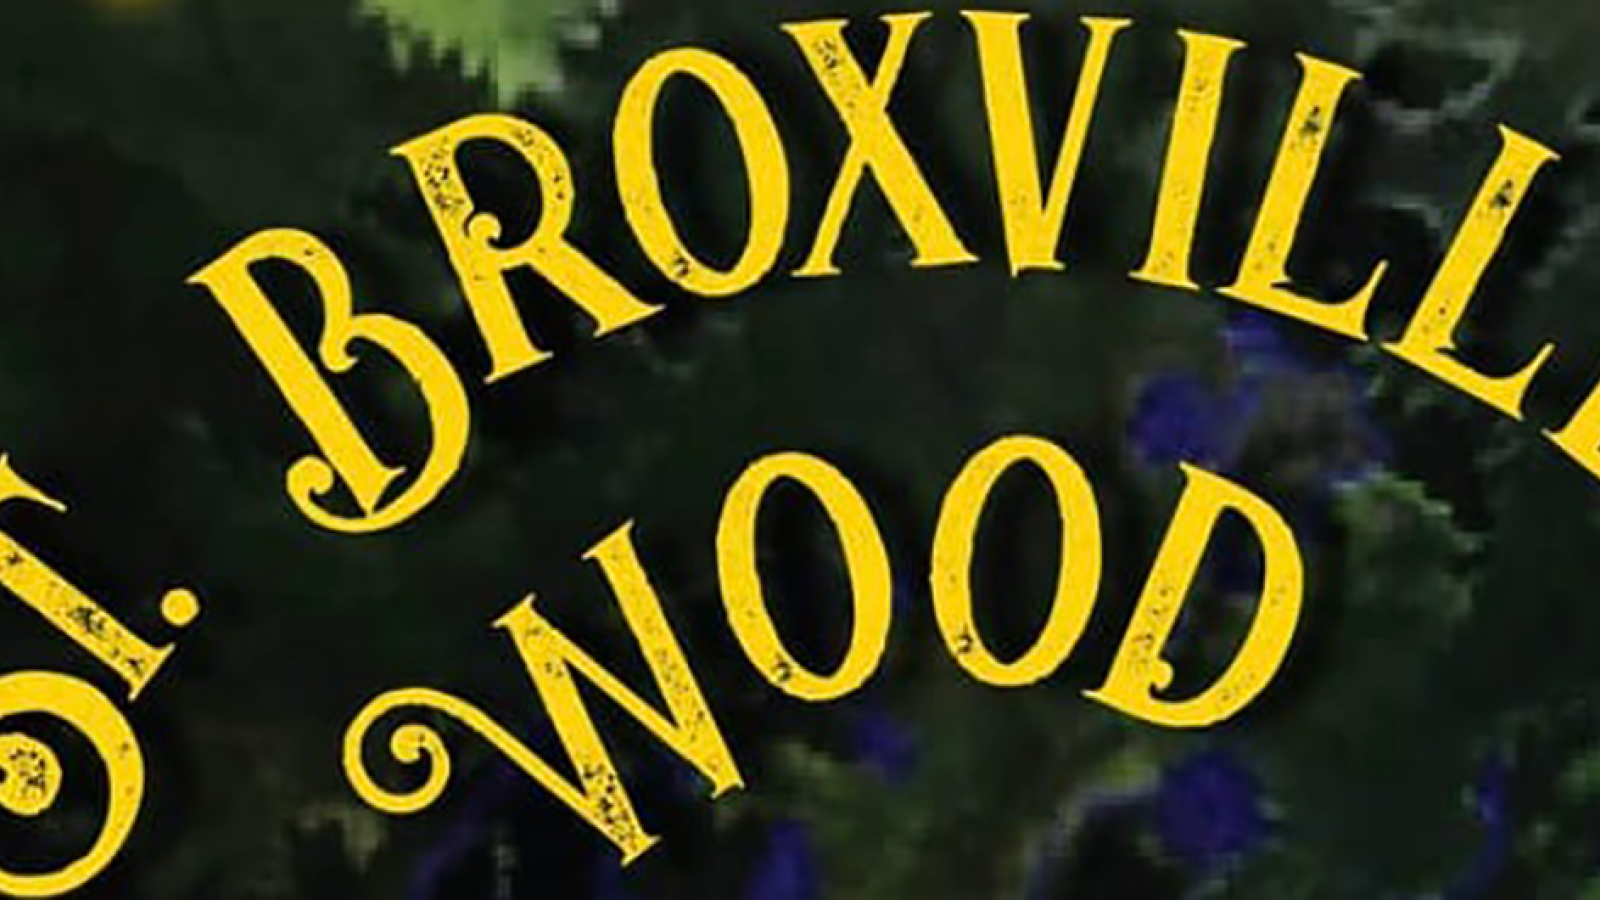 Banner for Virtual Show: St. Broxville Wood